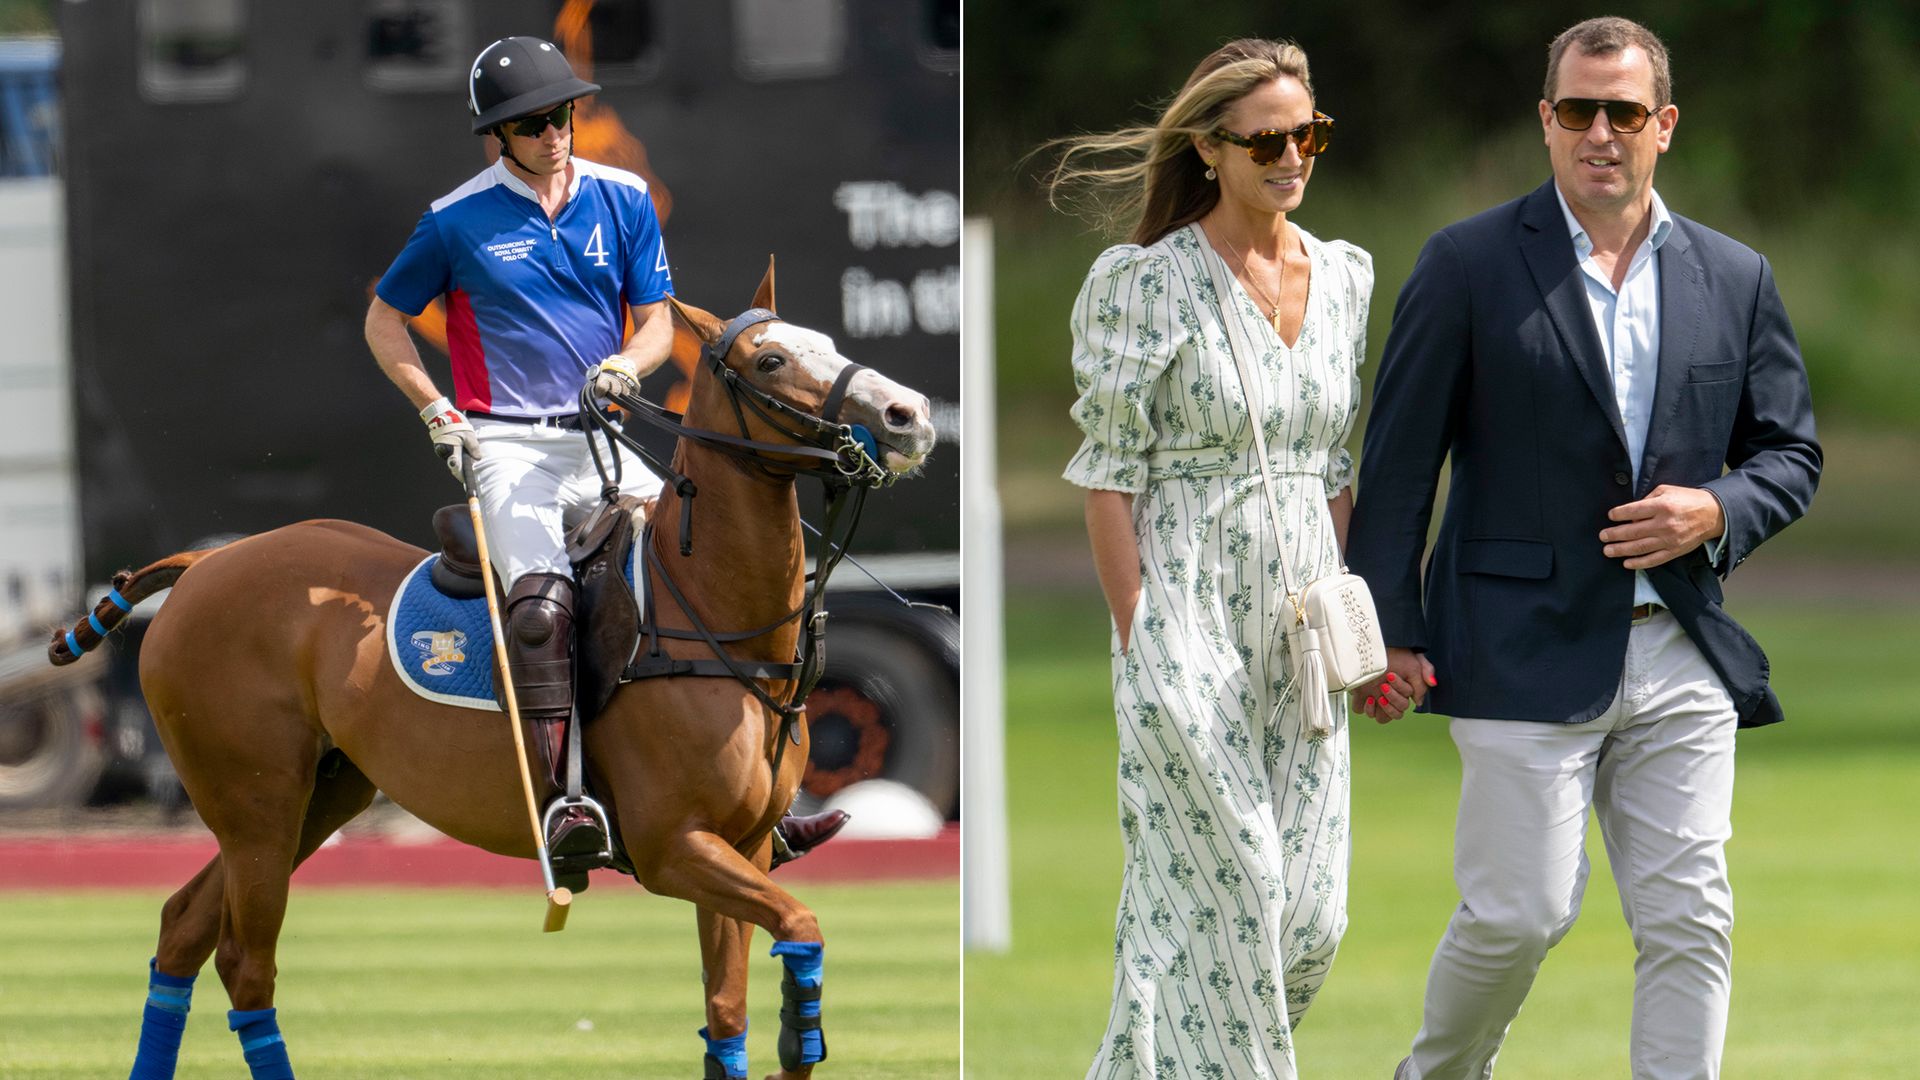 Peter Phillips and Harriet Sperling supported Prince William at the polo